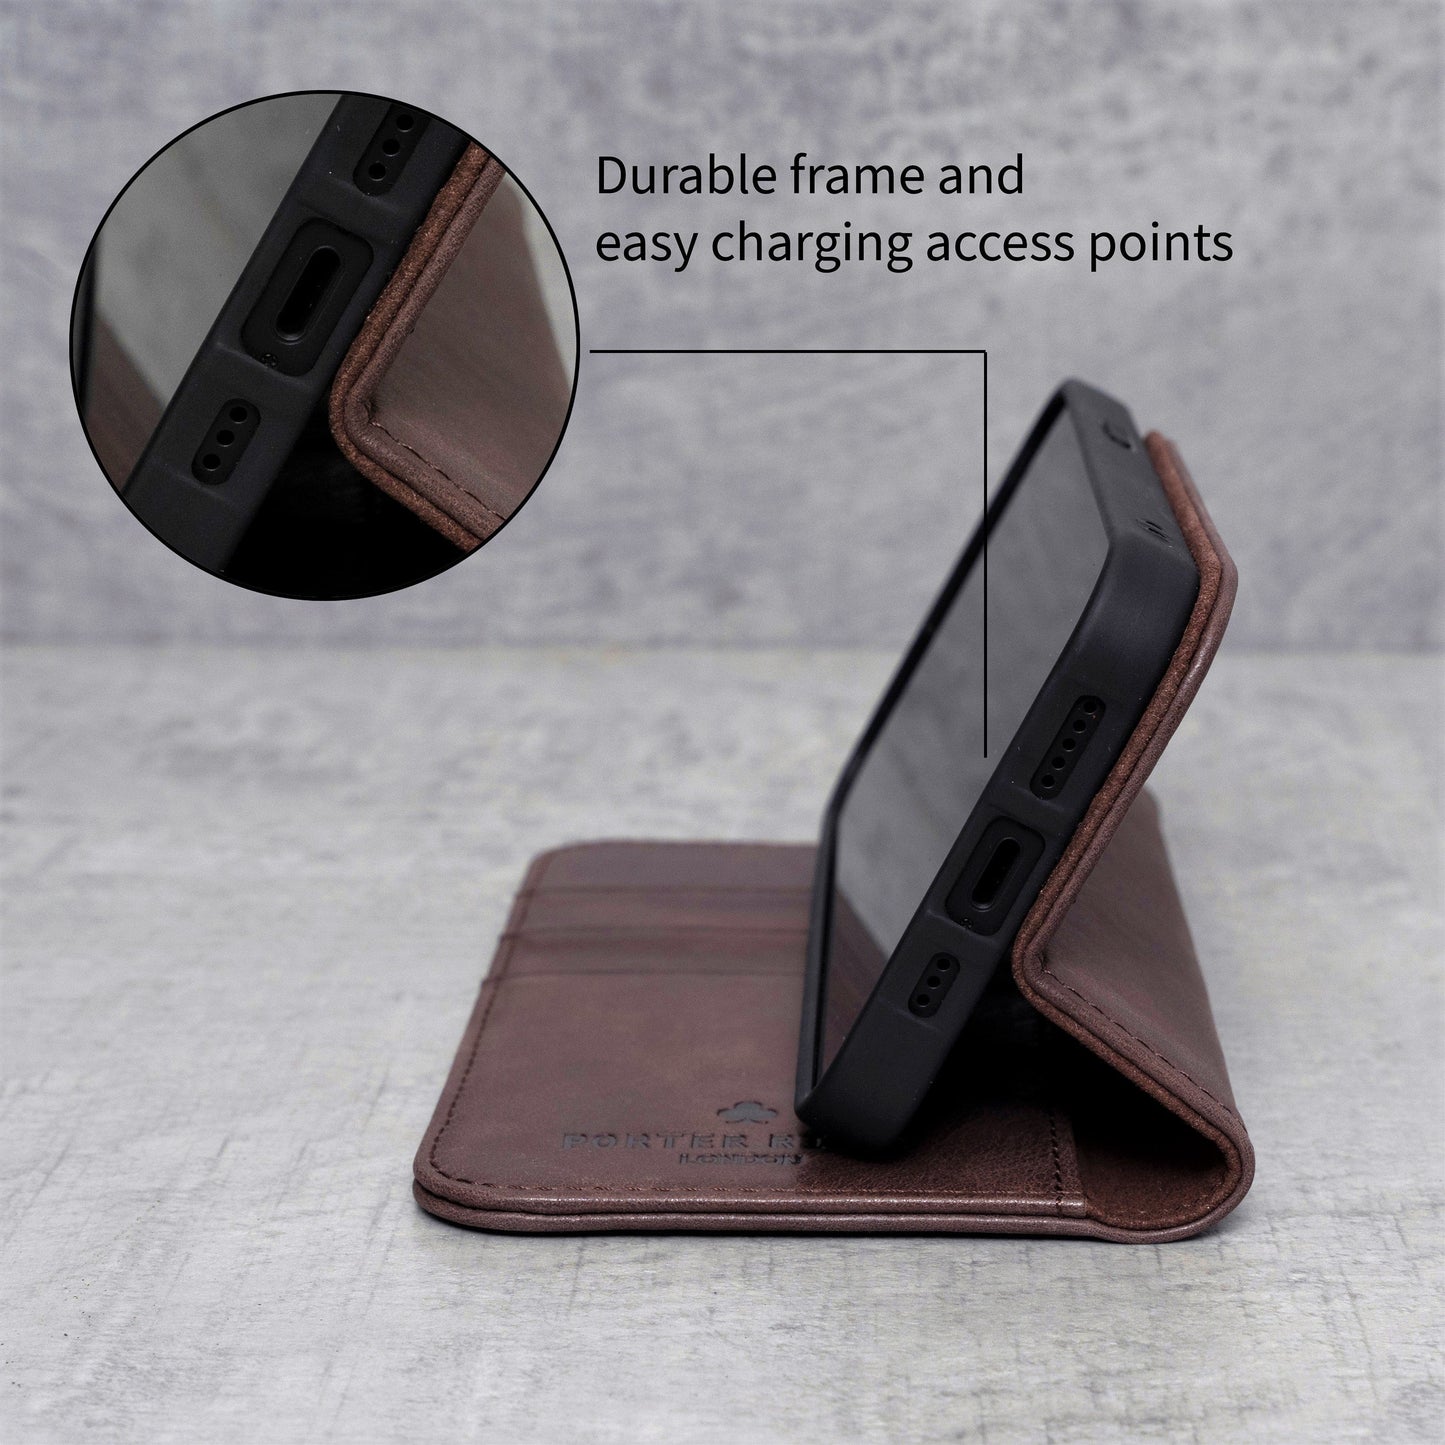 Huawei P20 Pro Leather Case. Premium Slim Genuine Leather Stand Case/Cover/Wallet (Chocolate Brown)